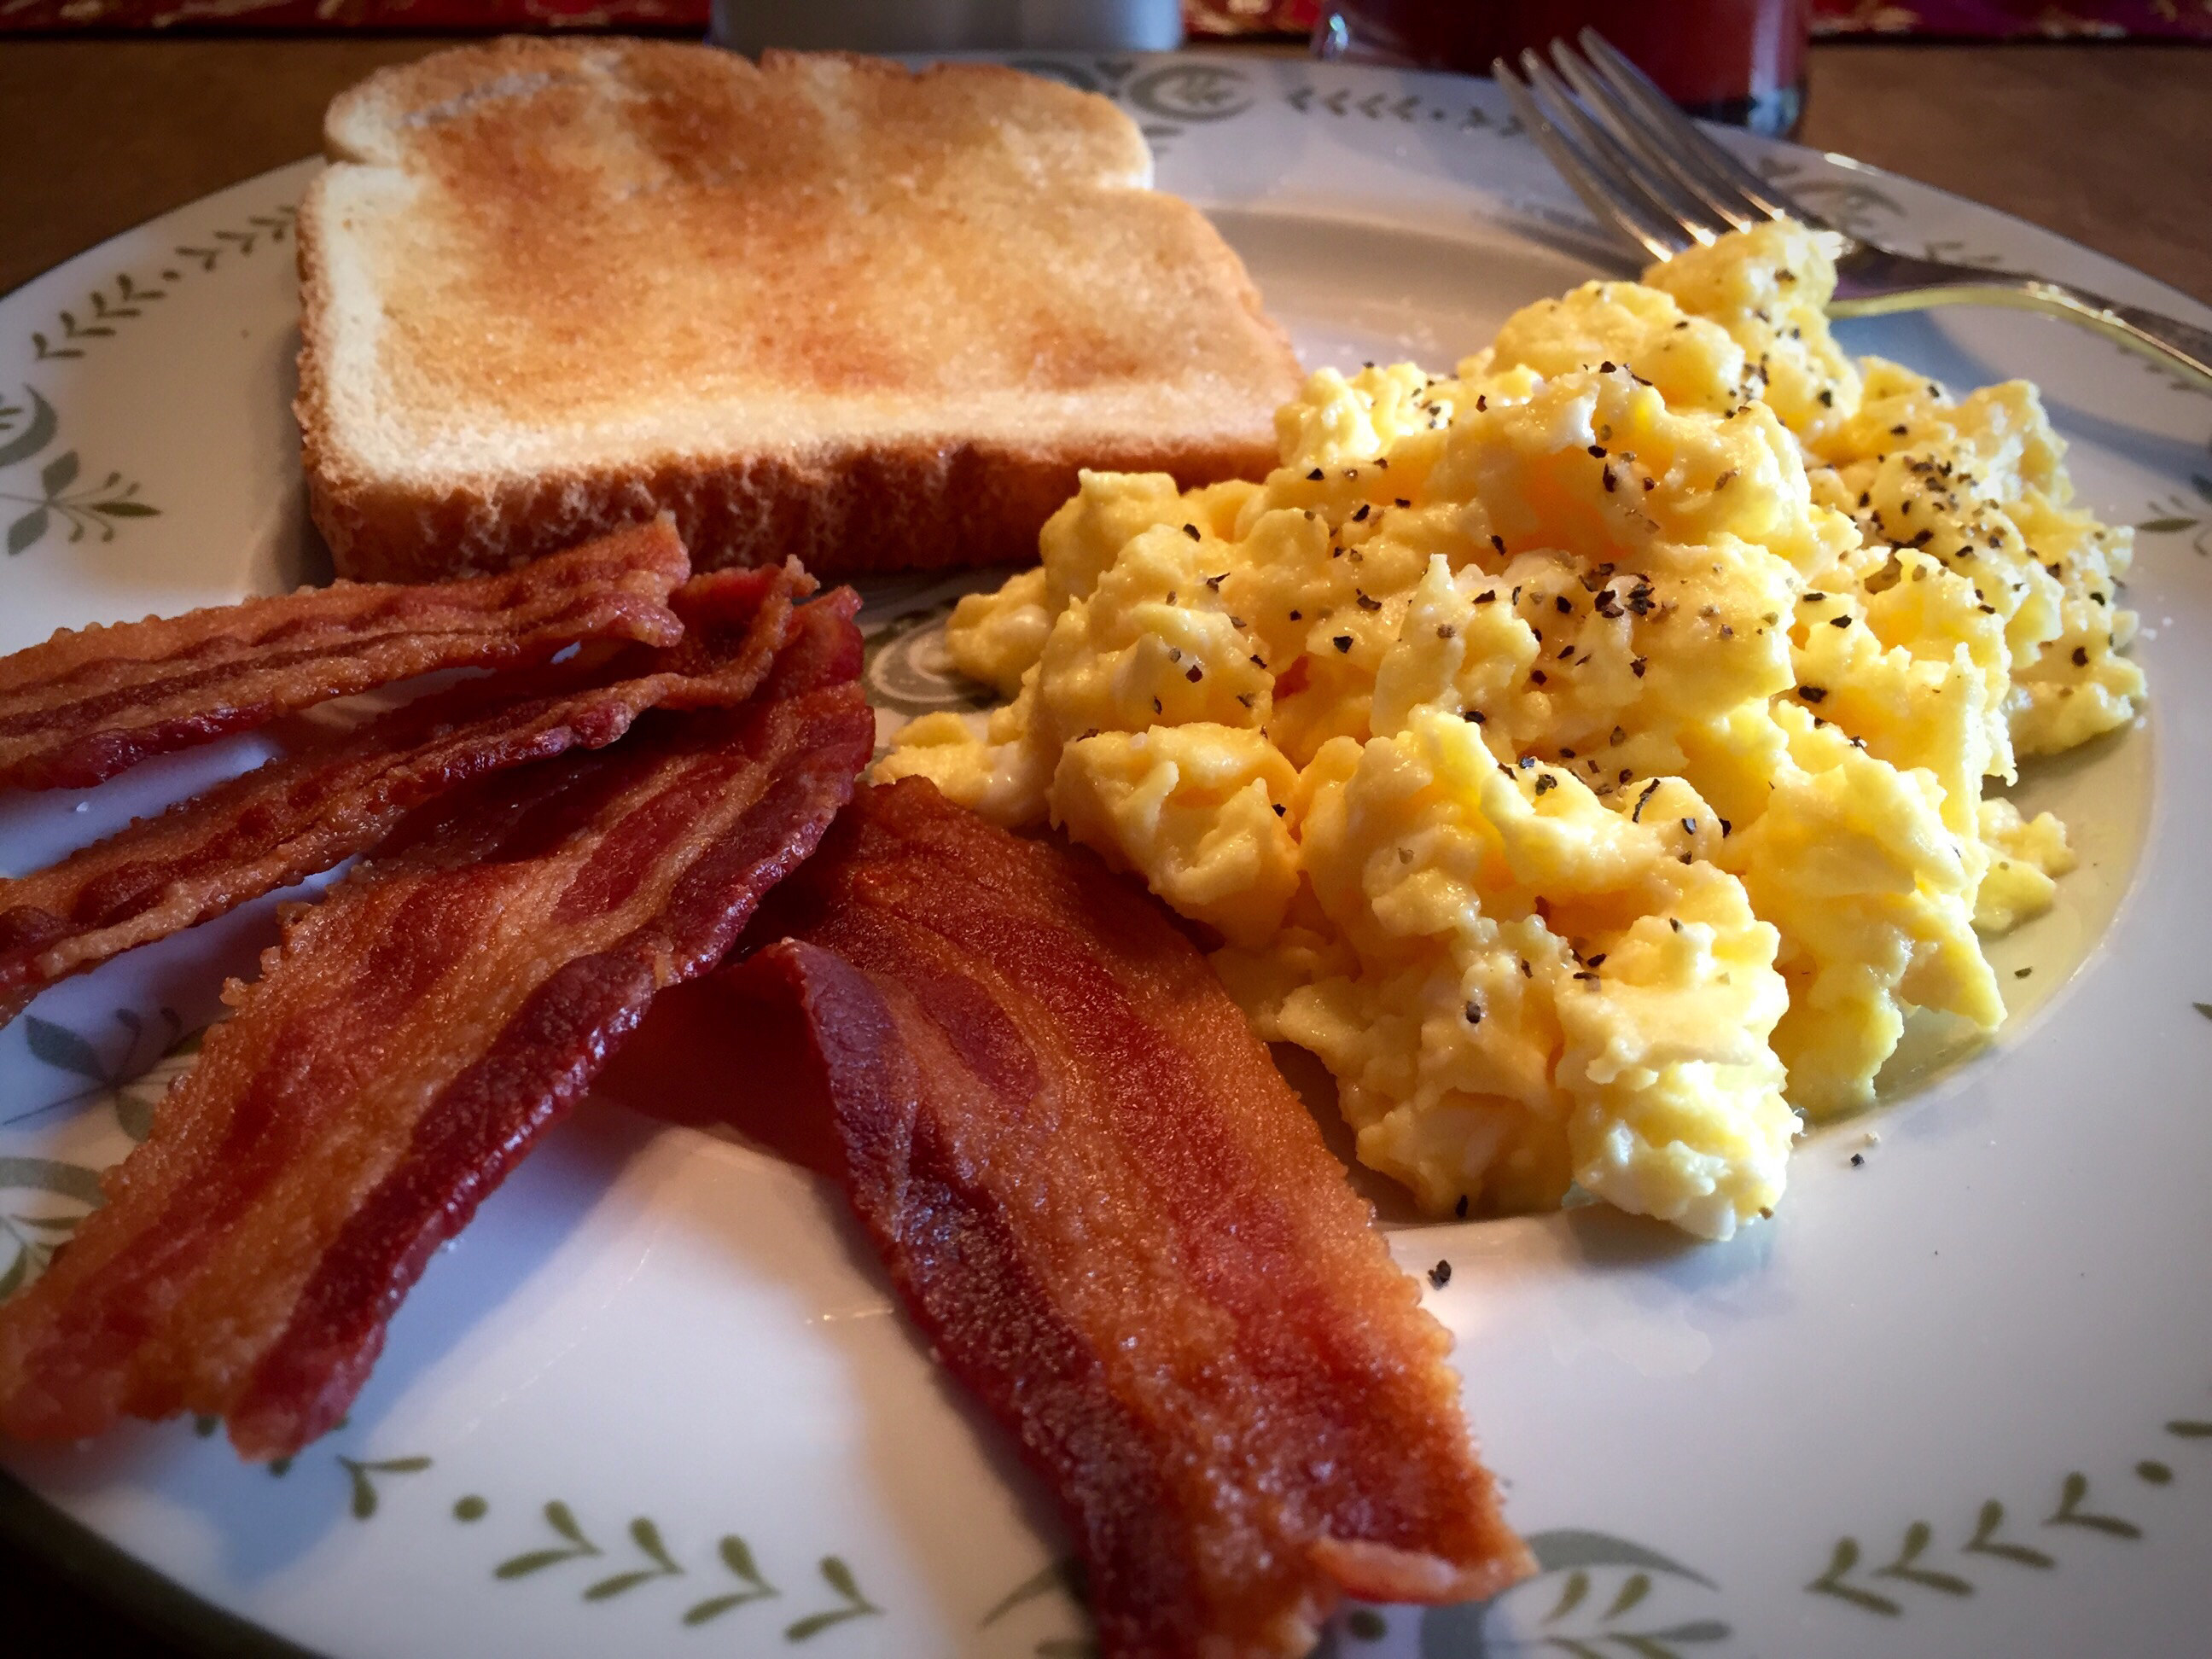 Eggs, bacon, and toast.